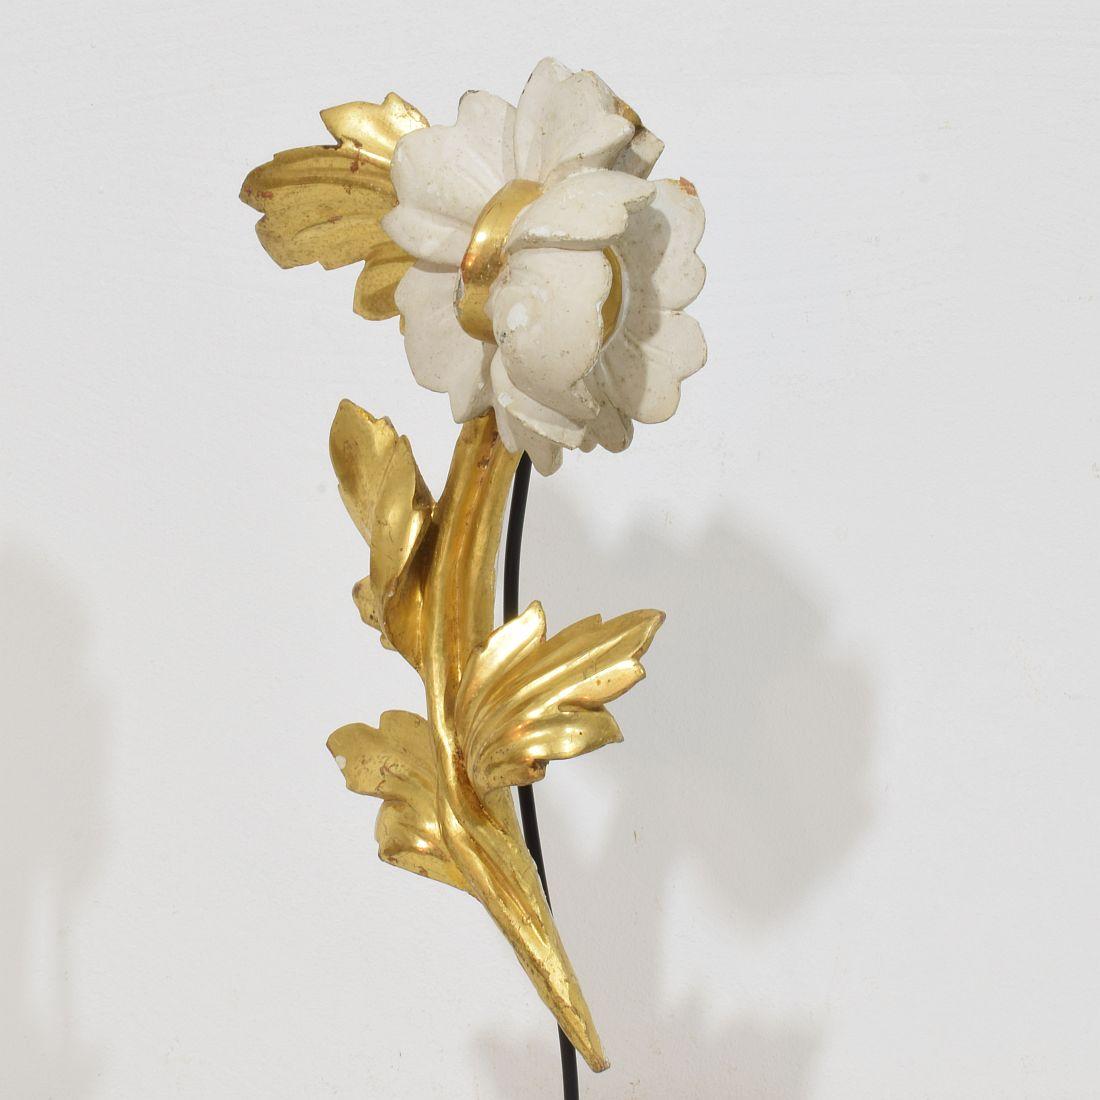 Italian 18/19th Century Hand Carved Giltwood Floral Ornament For Sale 2